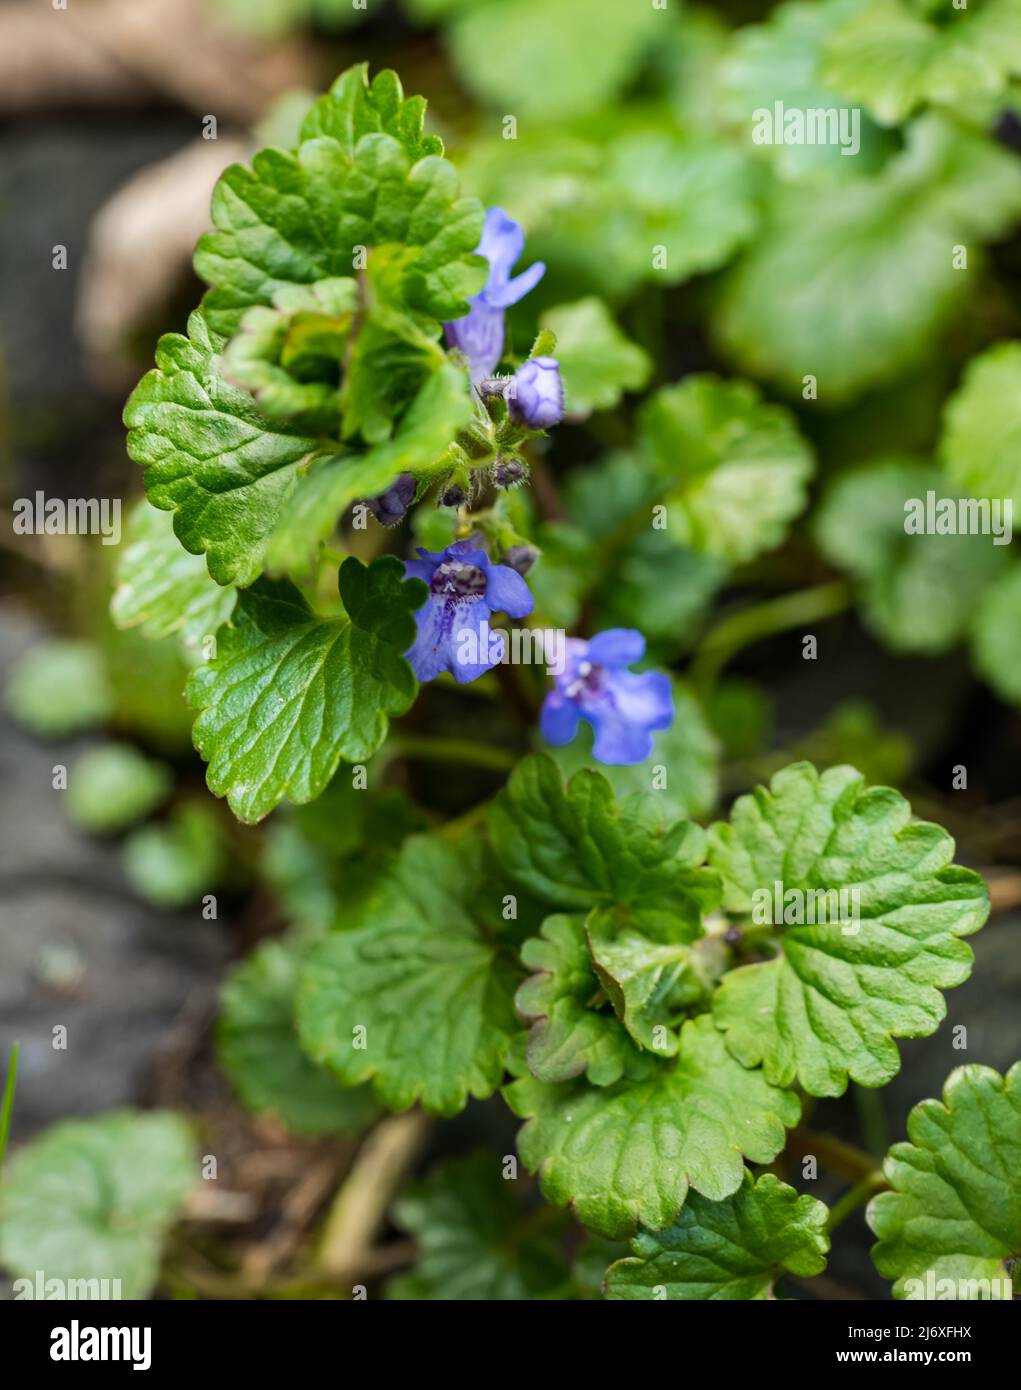 Ground ivy (alehoof, catsfoot, creeping charlie, field balm, gill over the ground, Glechoma hederacea, tunhoof) foraged for cooking, Scotland, UK Stock Photo